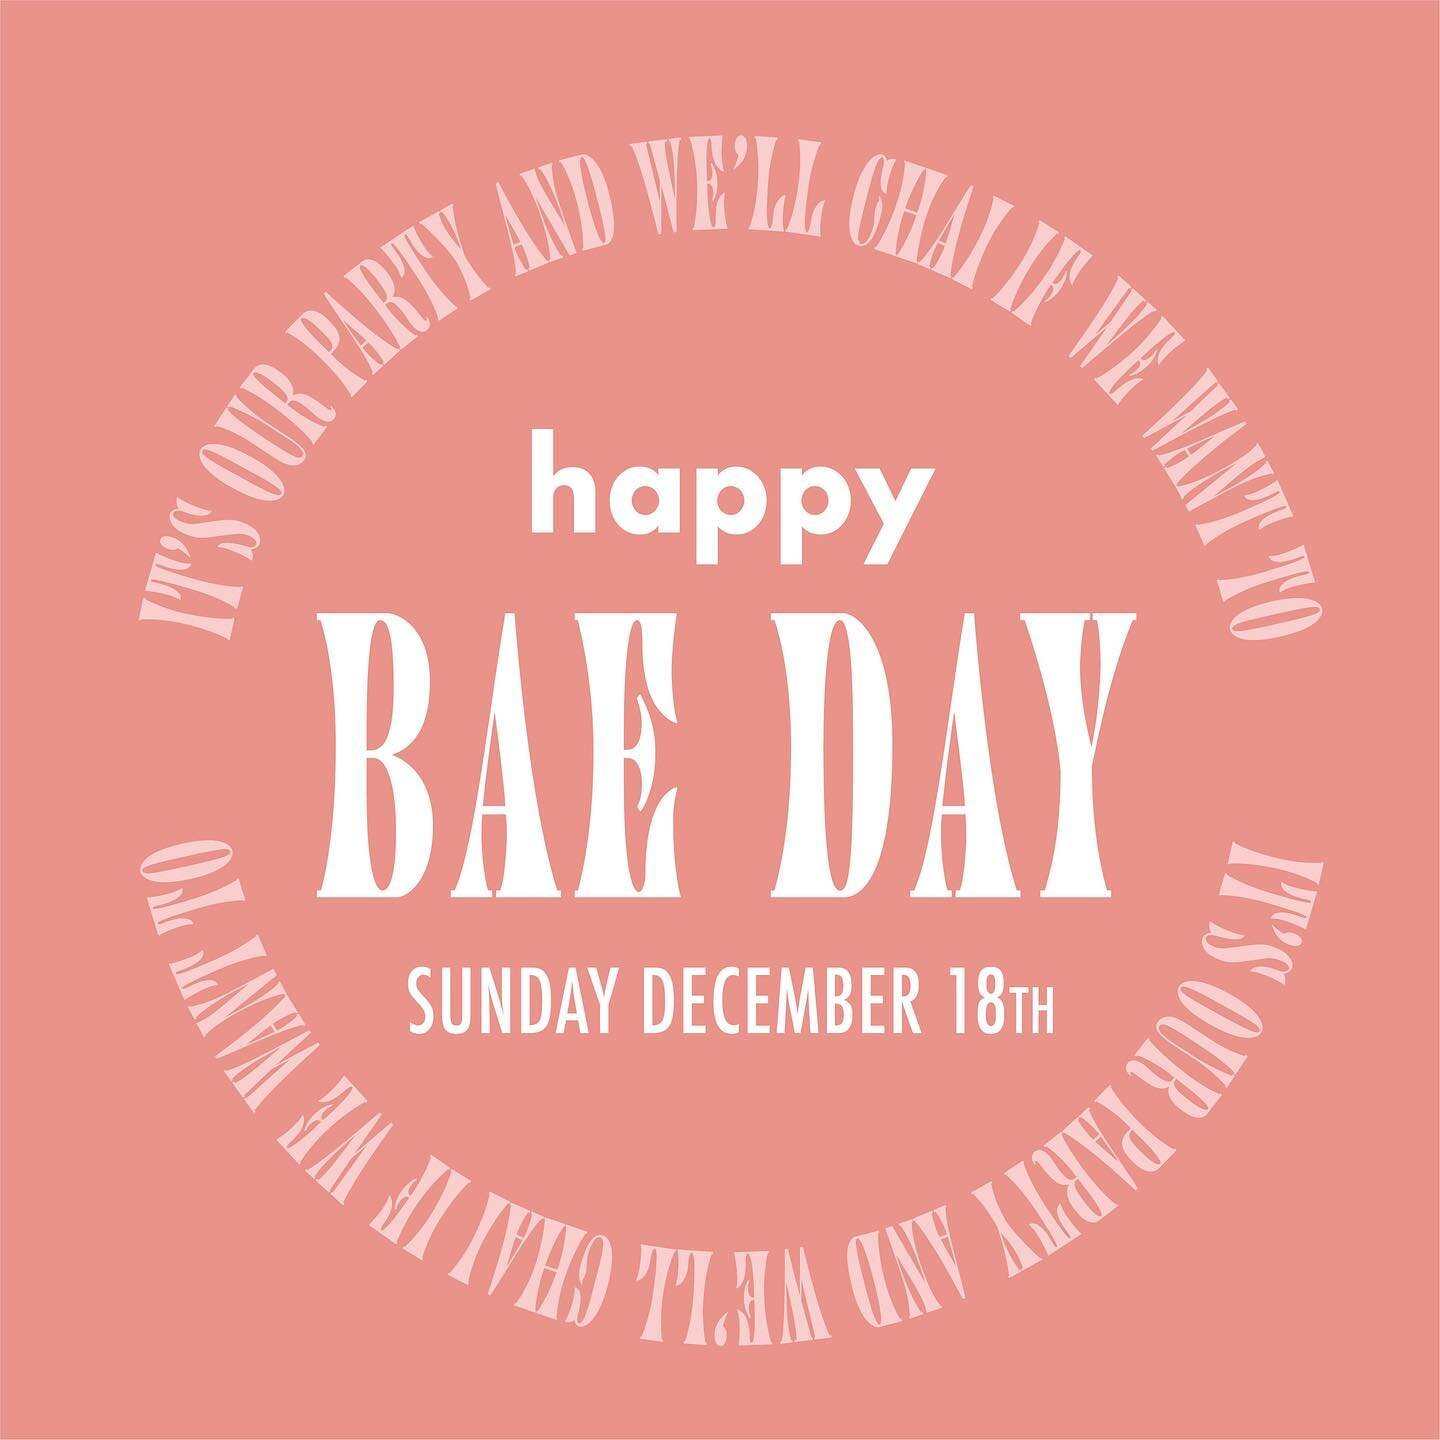 💕🪩☕️ ONE WEEK TIL BAE DAY ☕️🪩💕

baes we can&rsquo;t believe it but we&rsquo;ll be celebrating our first anniversary next Sunday. this has been a year absolutely full of learning, growing, and caffeinating with wonderful new friends. we invite you